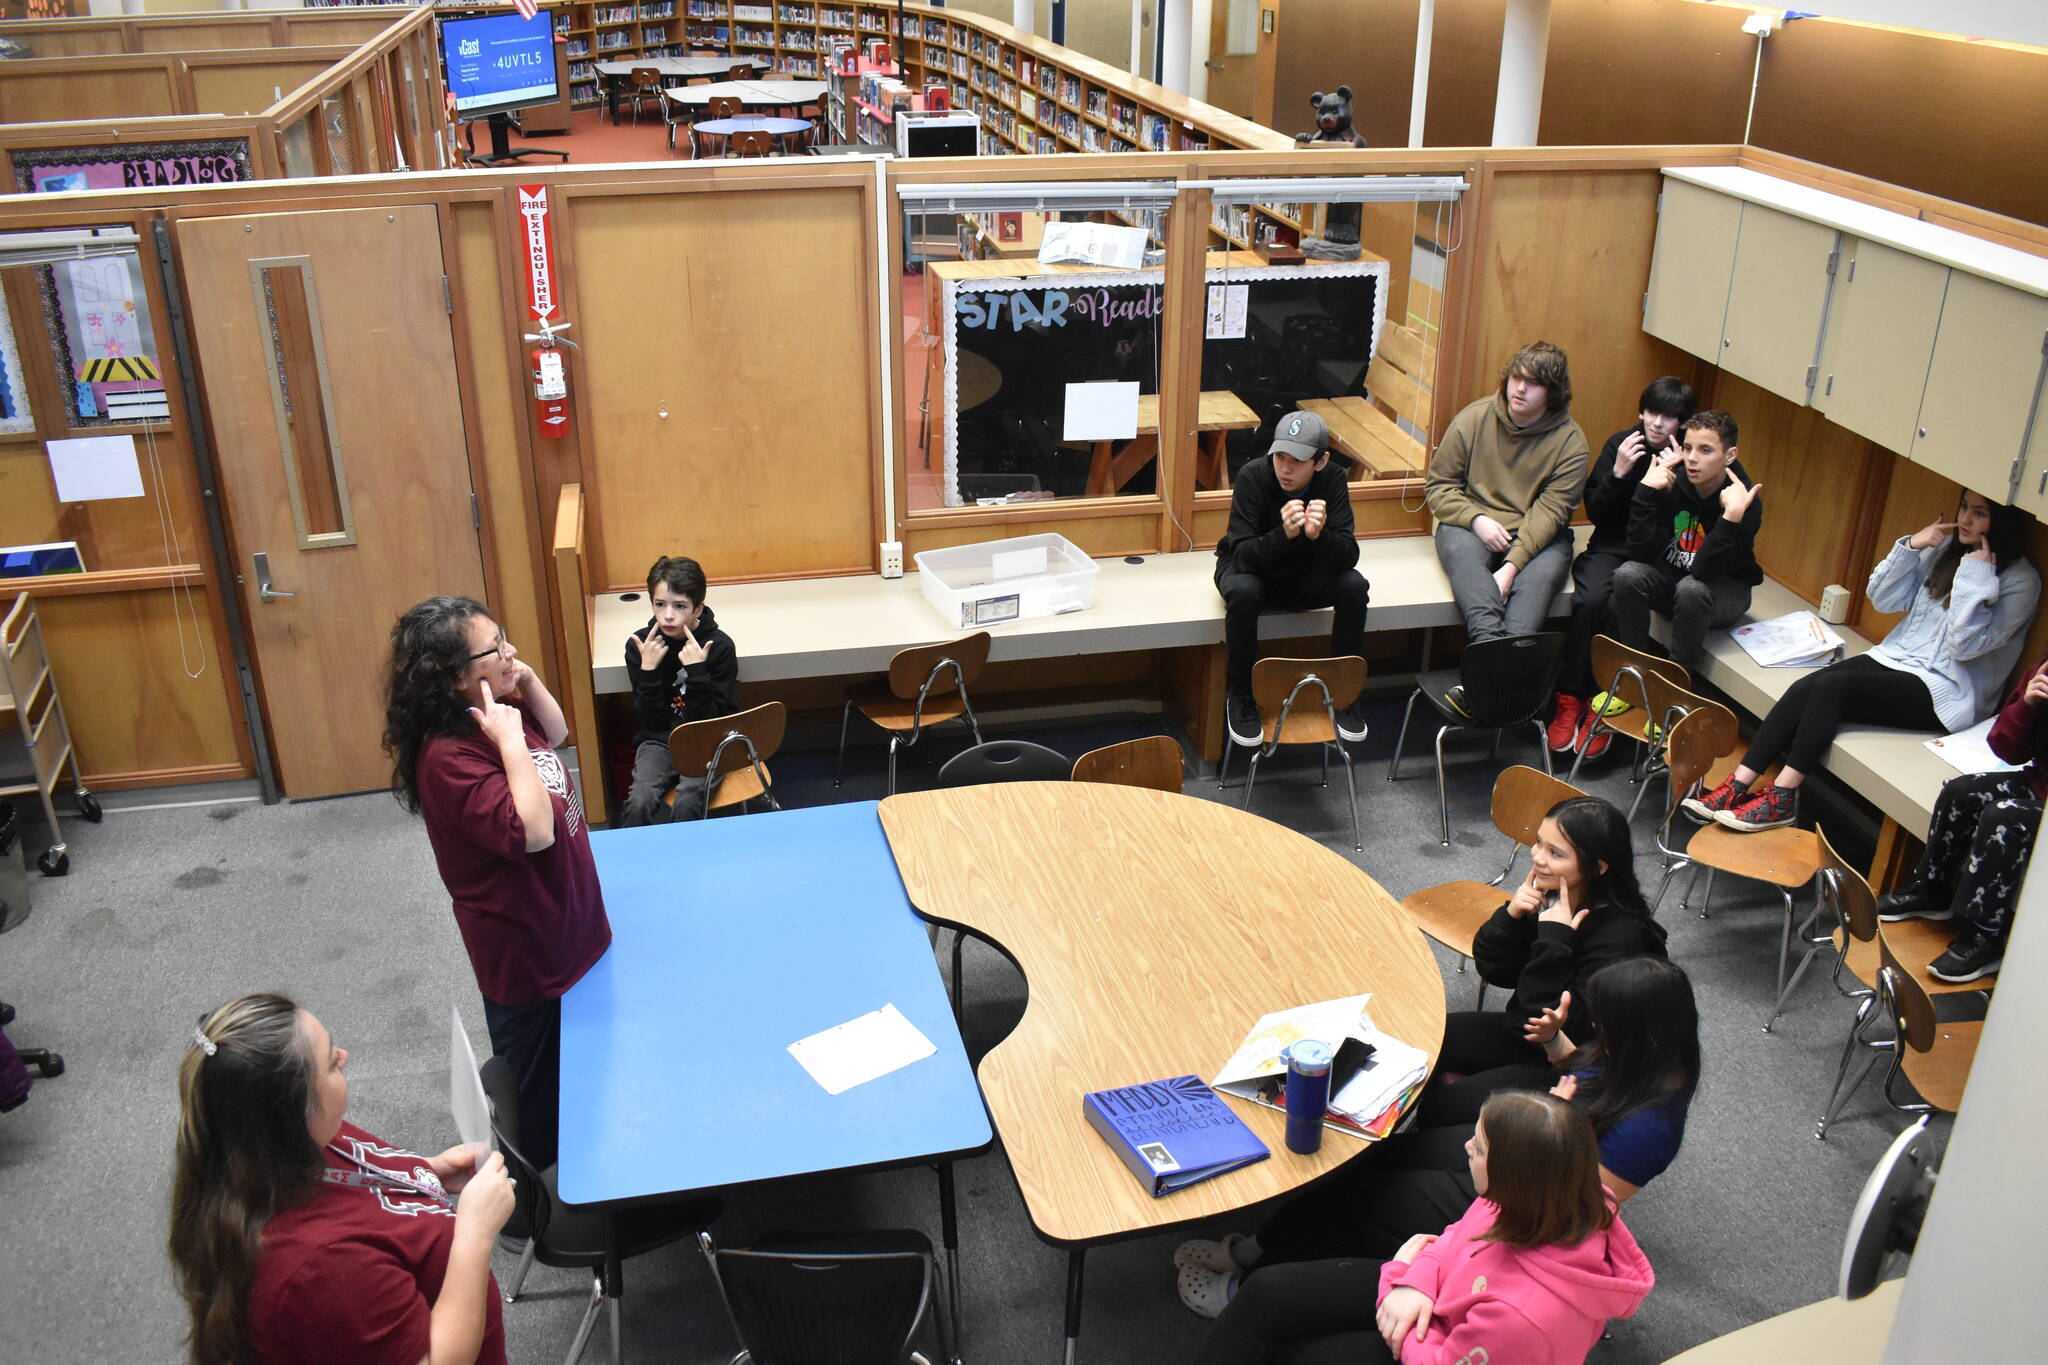 Clayton Franke / The Daily World
With the help of Hoquiam Native Education Coordinator Sandy Ruiz, bottom-left, Cosette Terry-itewaste leads a Quinault language class at Hoquiam Middle School on Friday, Feb. 2.